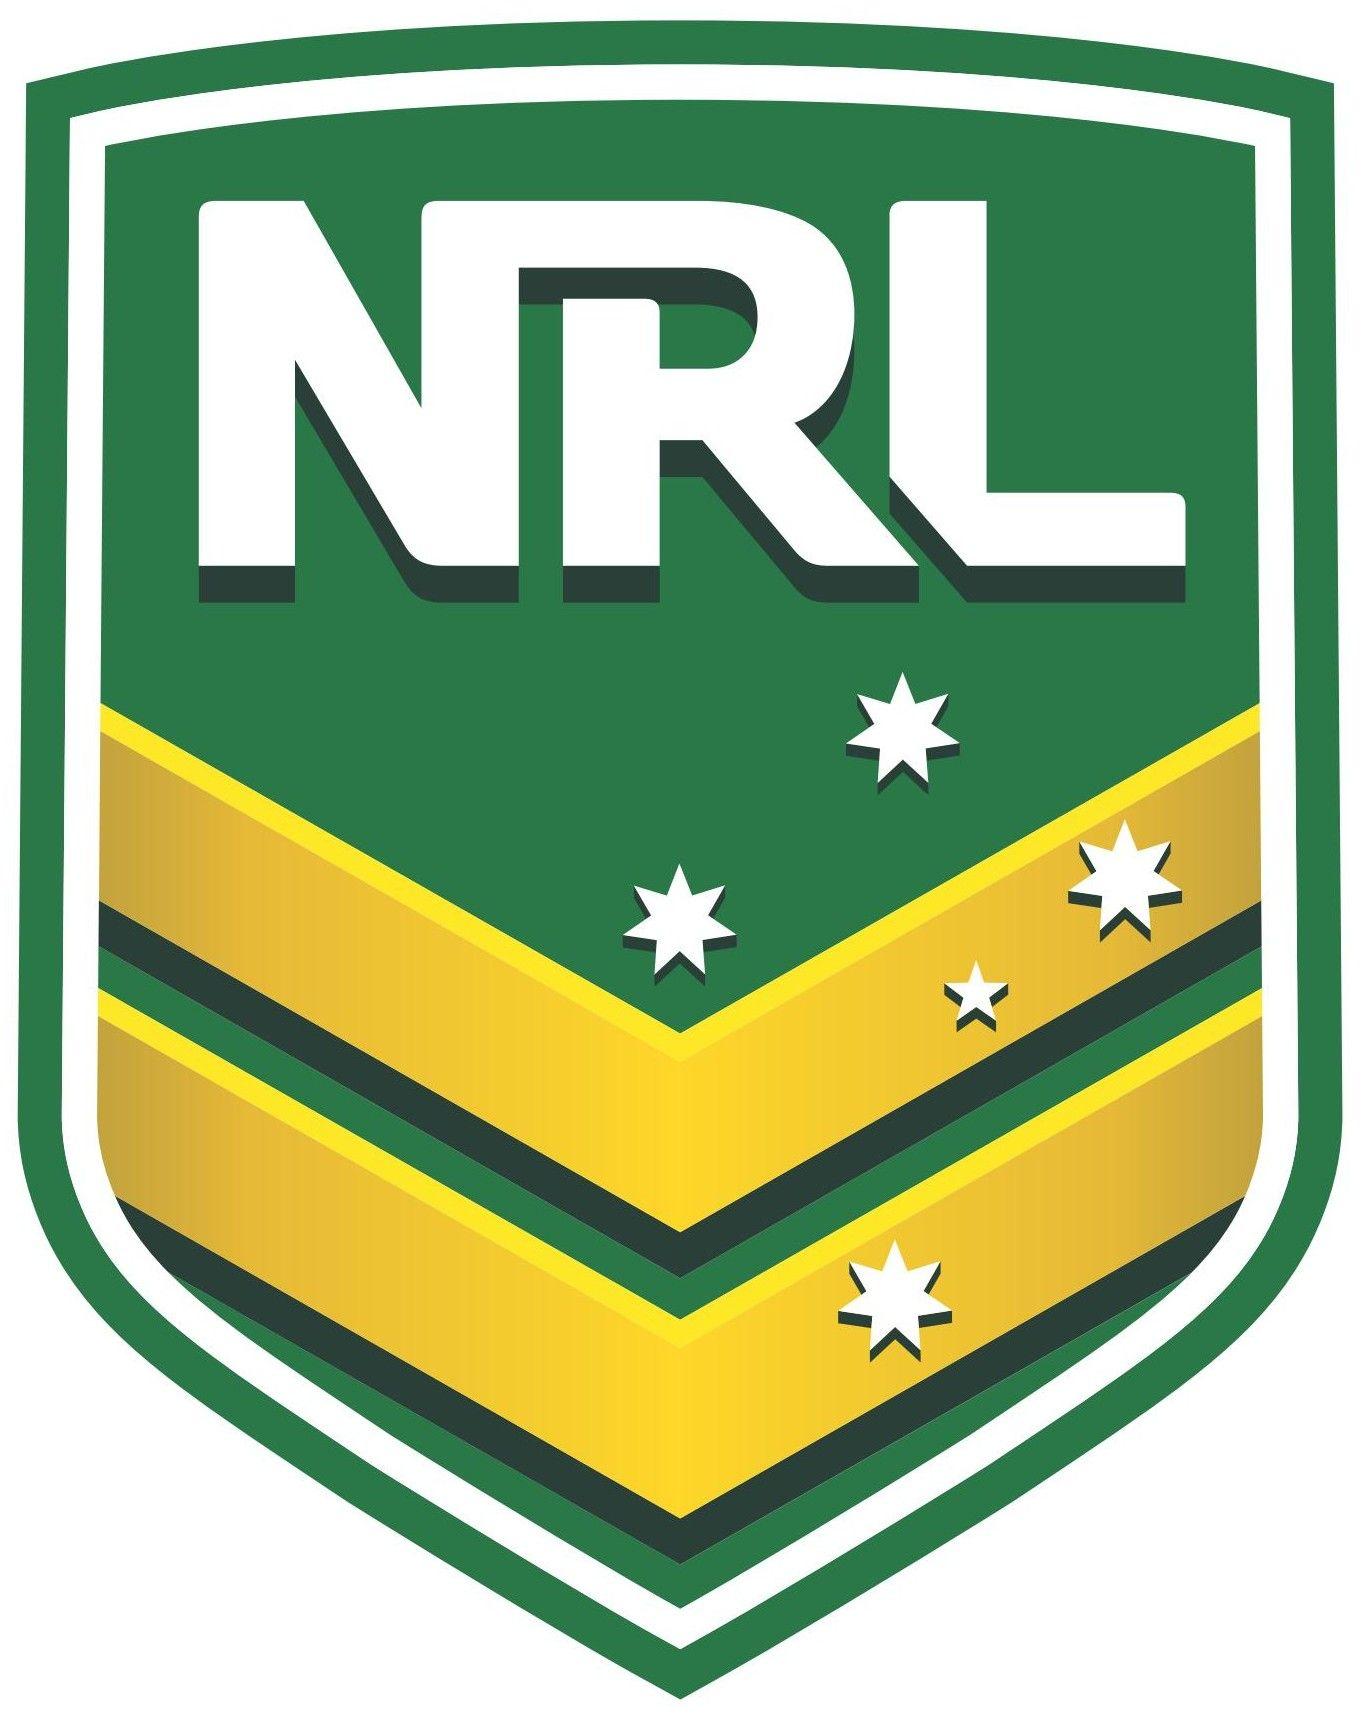 Rugby League Logo - NRL Australia (National Rugby League) | Logos - Other Sports | Rugby ...